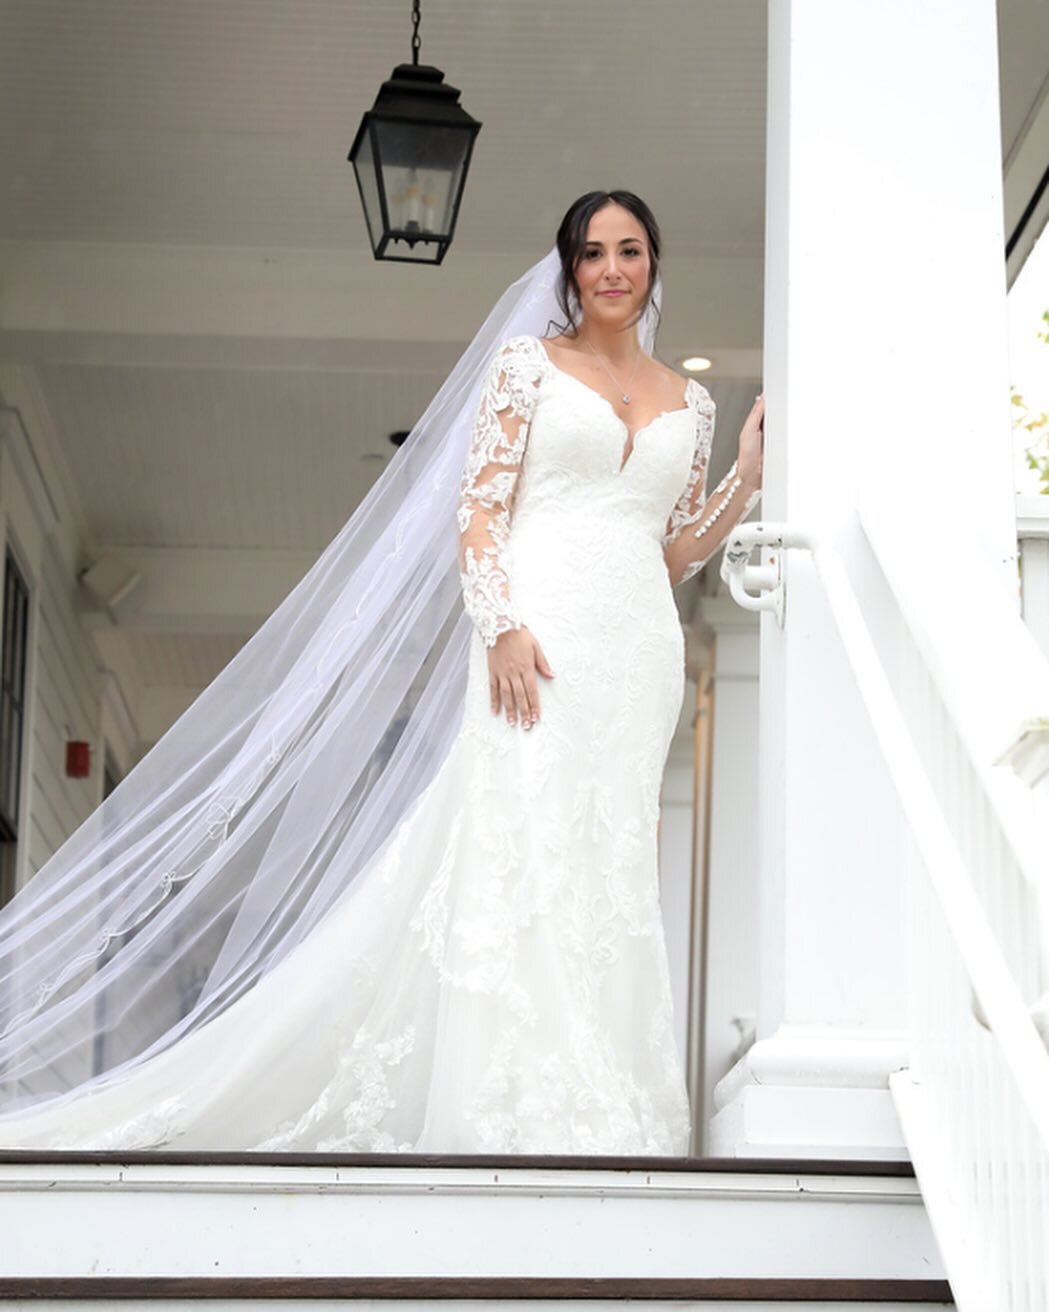 Stepping into wedding day looking like a vision!  Embrace your style, your individuality and your radiance!  Mackenzie, your presence shined through! ☀️

YOU are the center of everything we do!

Wedding Planning: @candicegrace_events 
Venue: @taconic